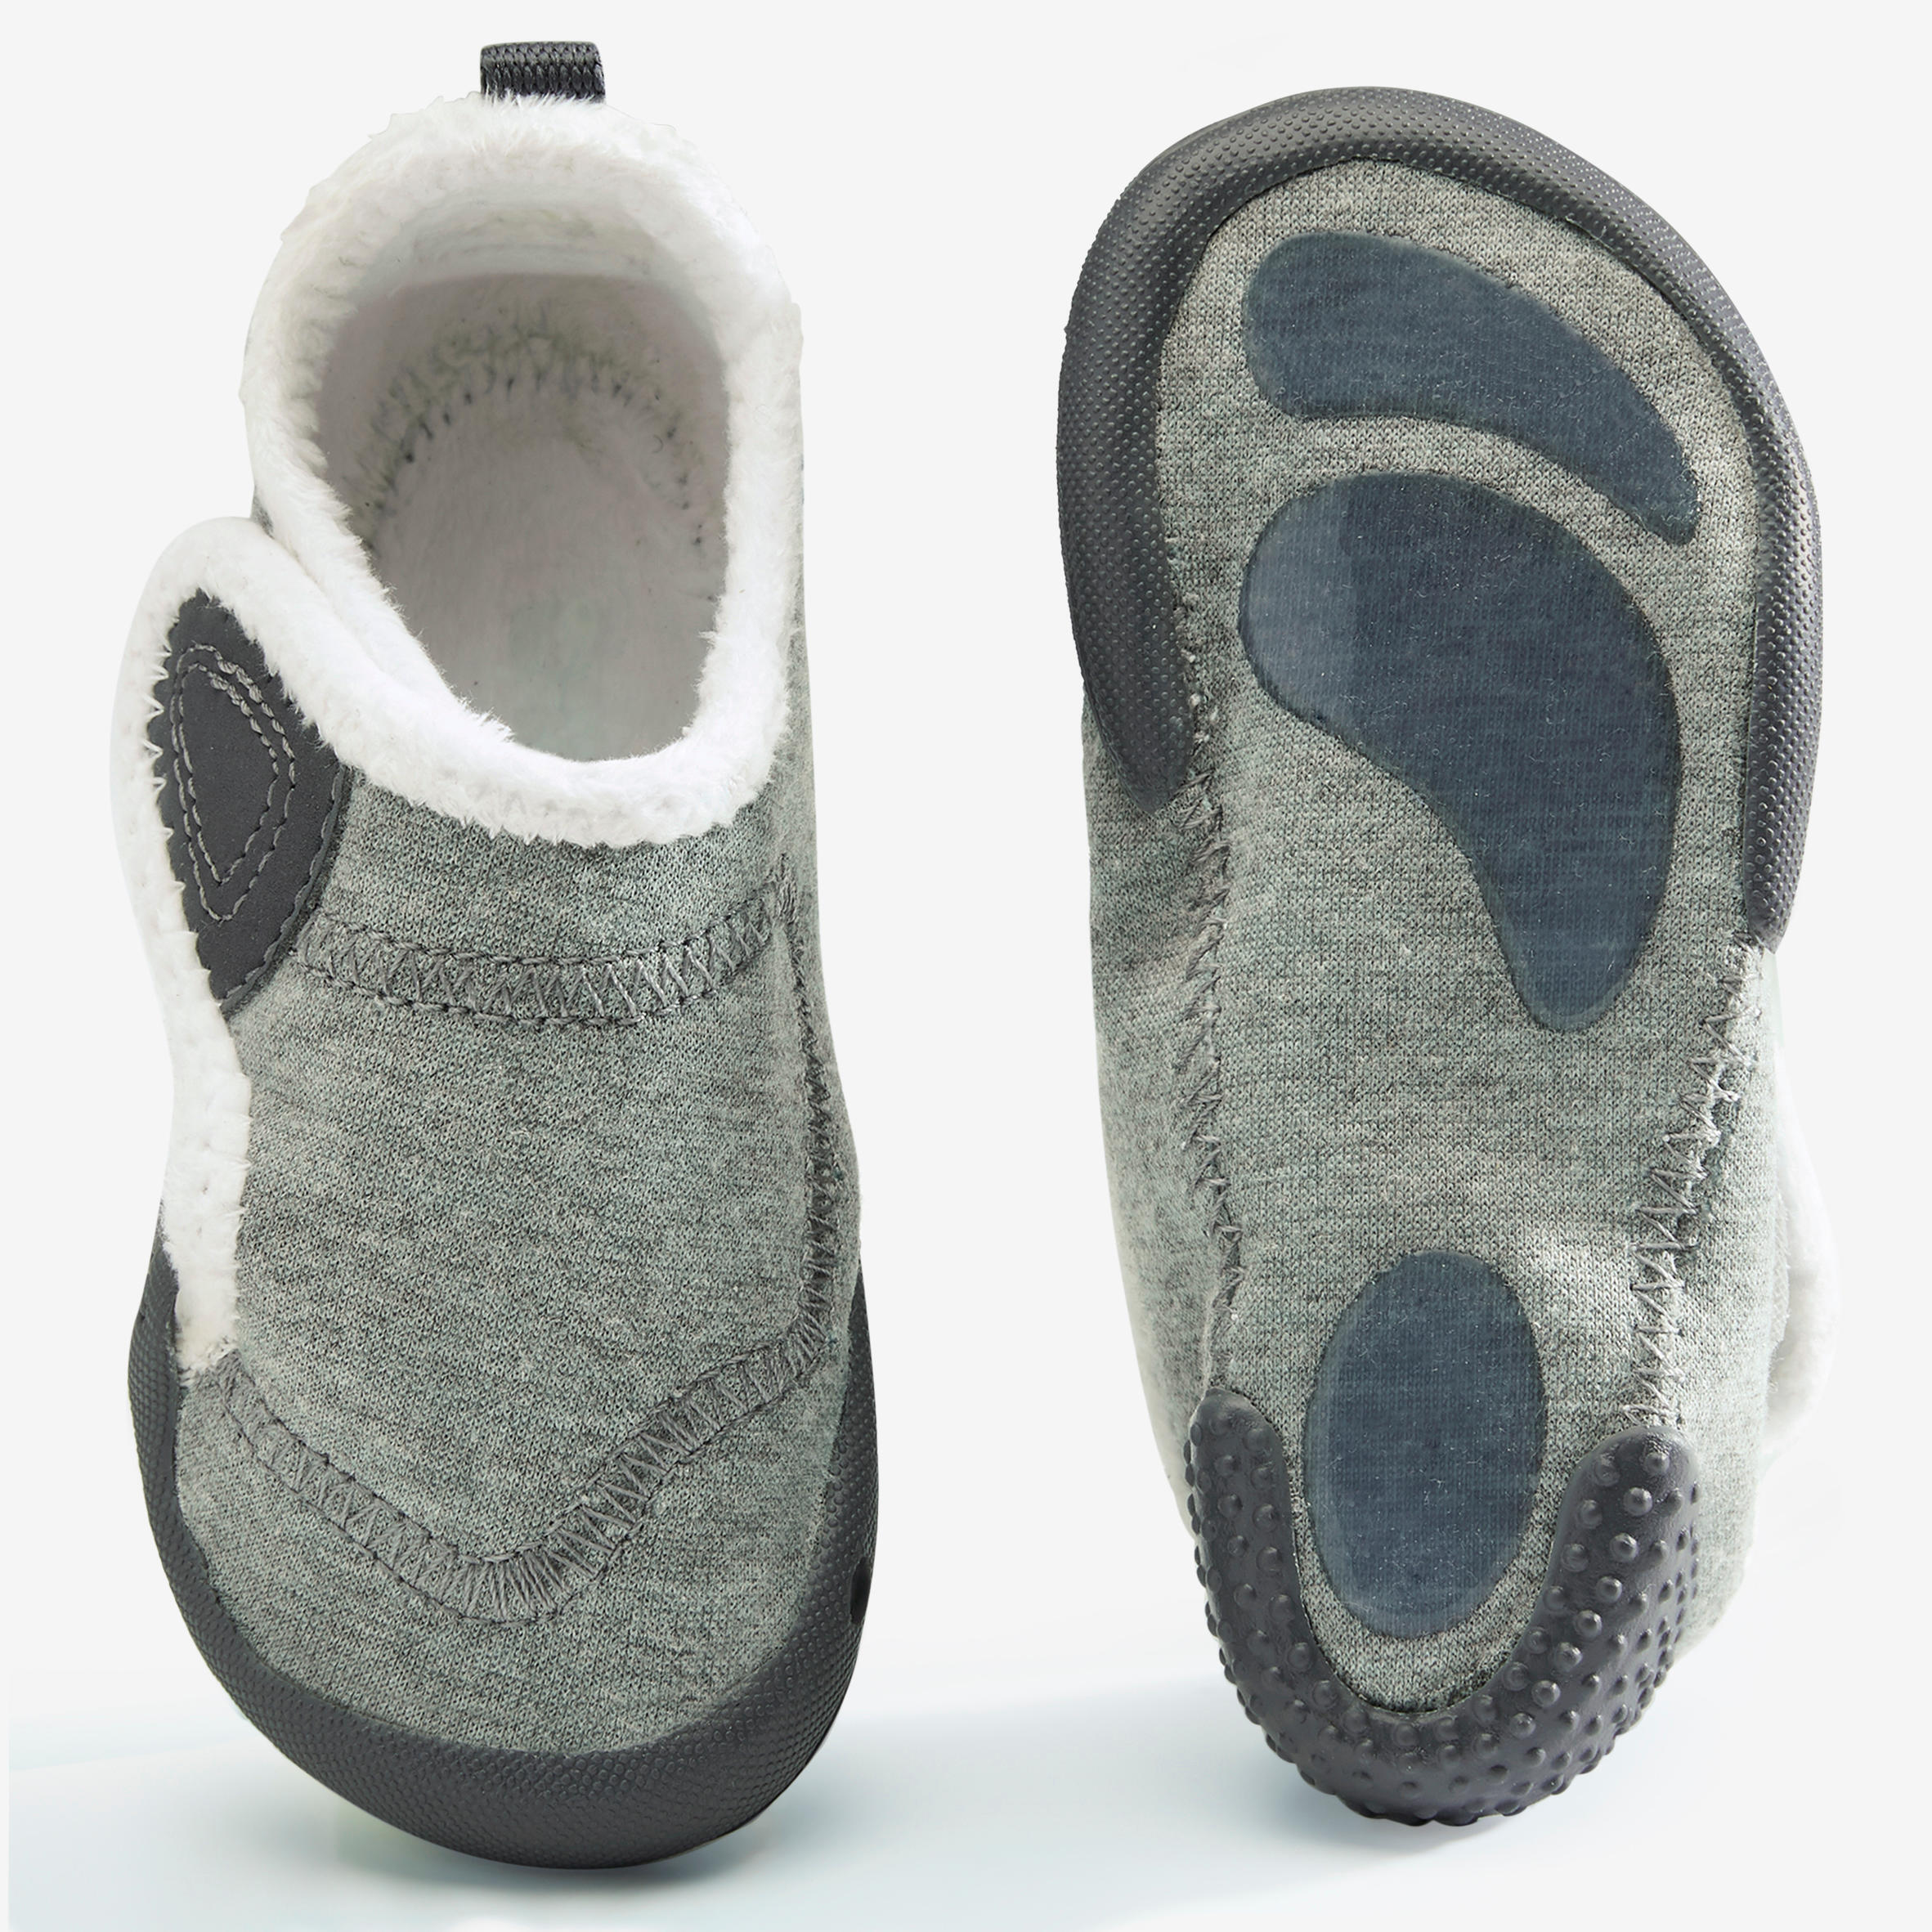 Kids' Soft and Non-Slip Bootee 4/7